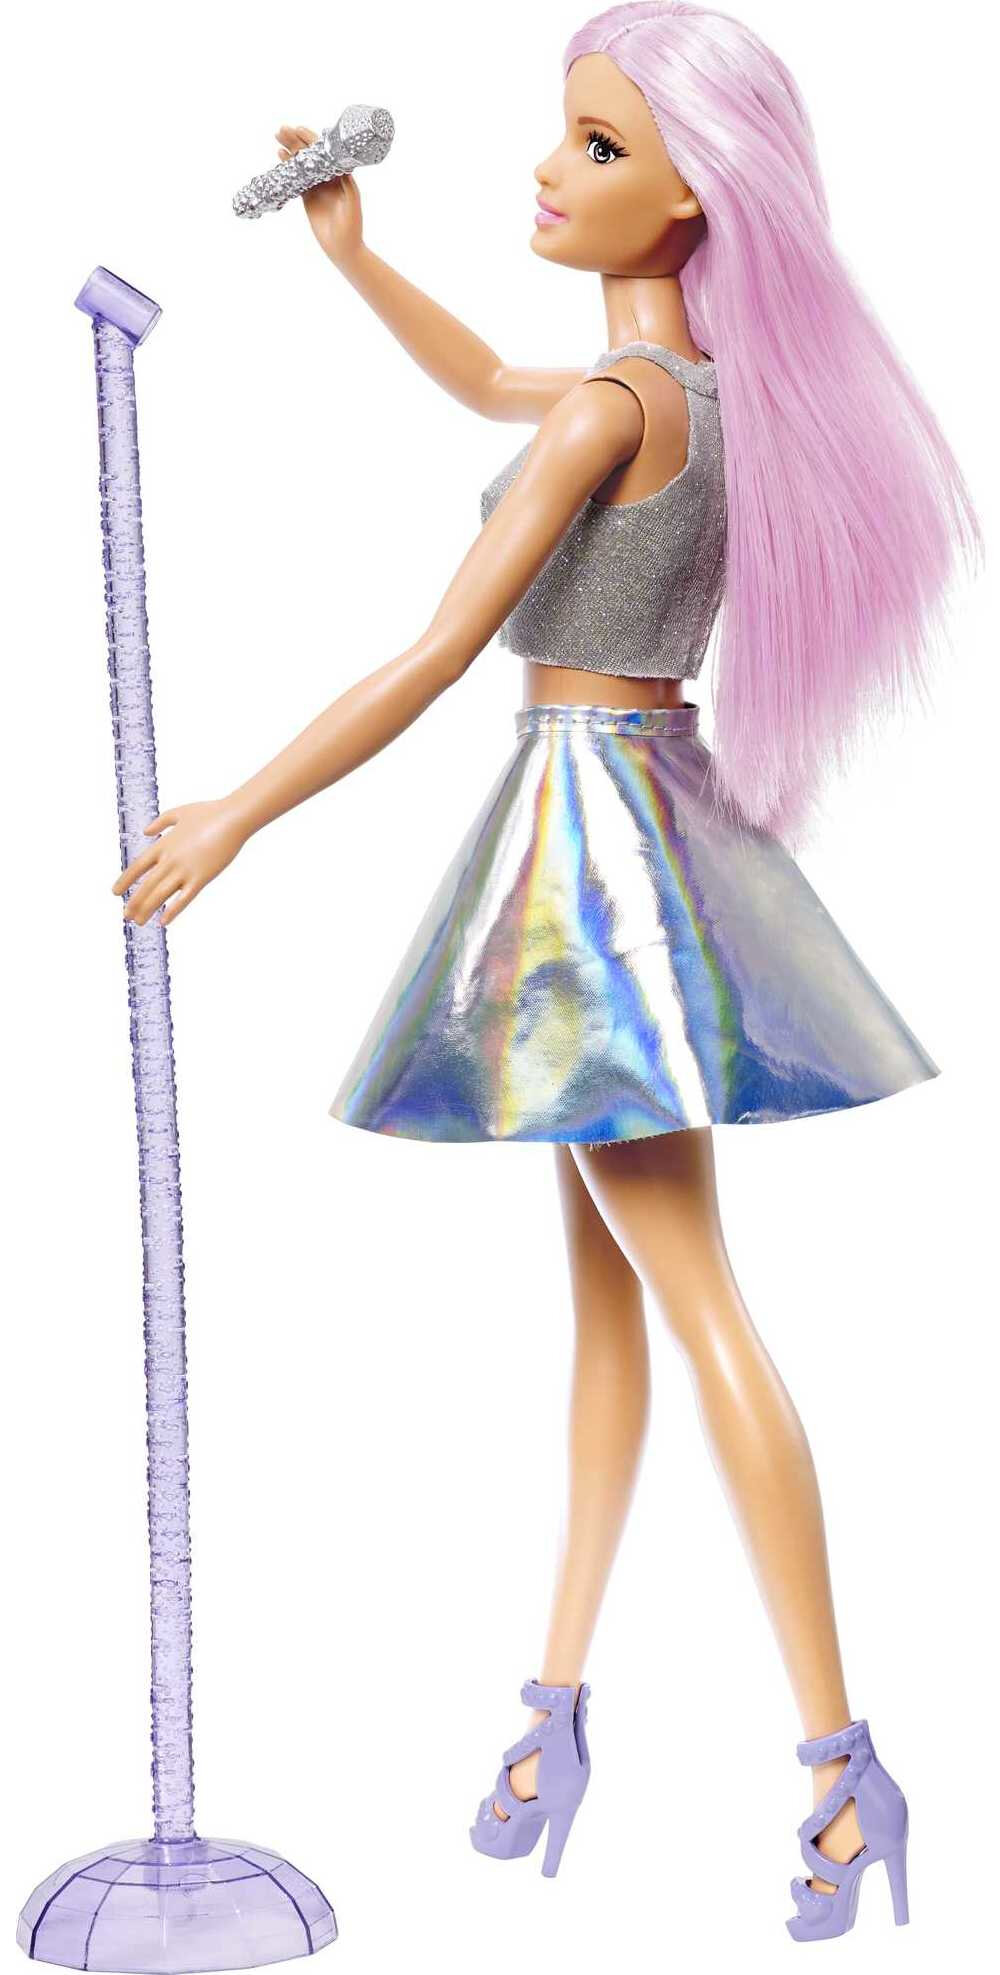 Barbie Pop Star Fashion Doll Dressed in Iridescent Skirt with Pink Hair & Brown Eyes - image 5 of 6